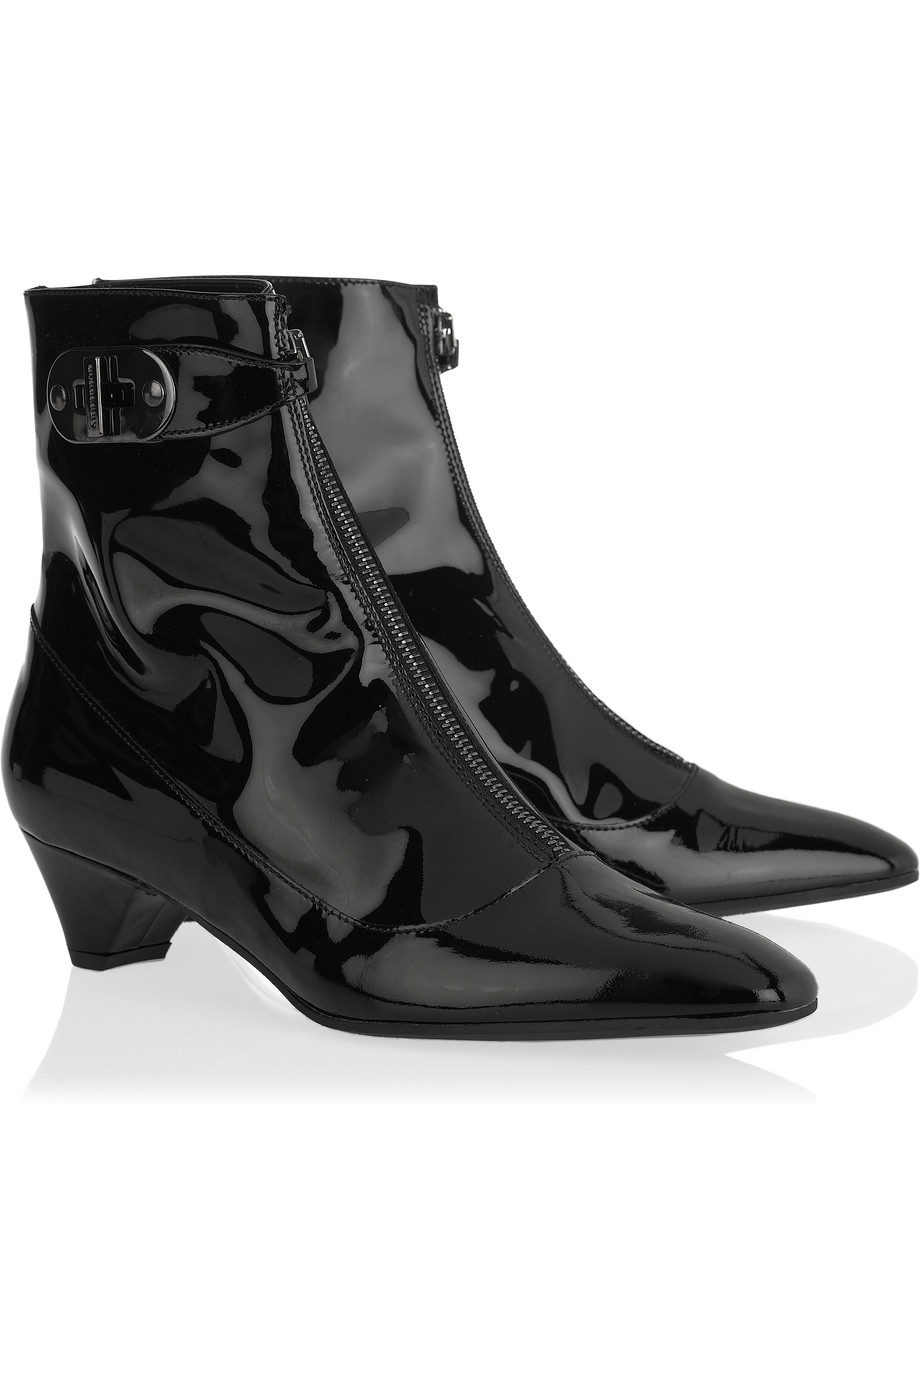 Burberry Patent-leather Ankle Boots in Black | Lyst